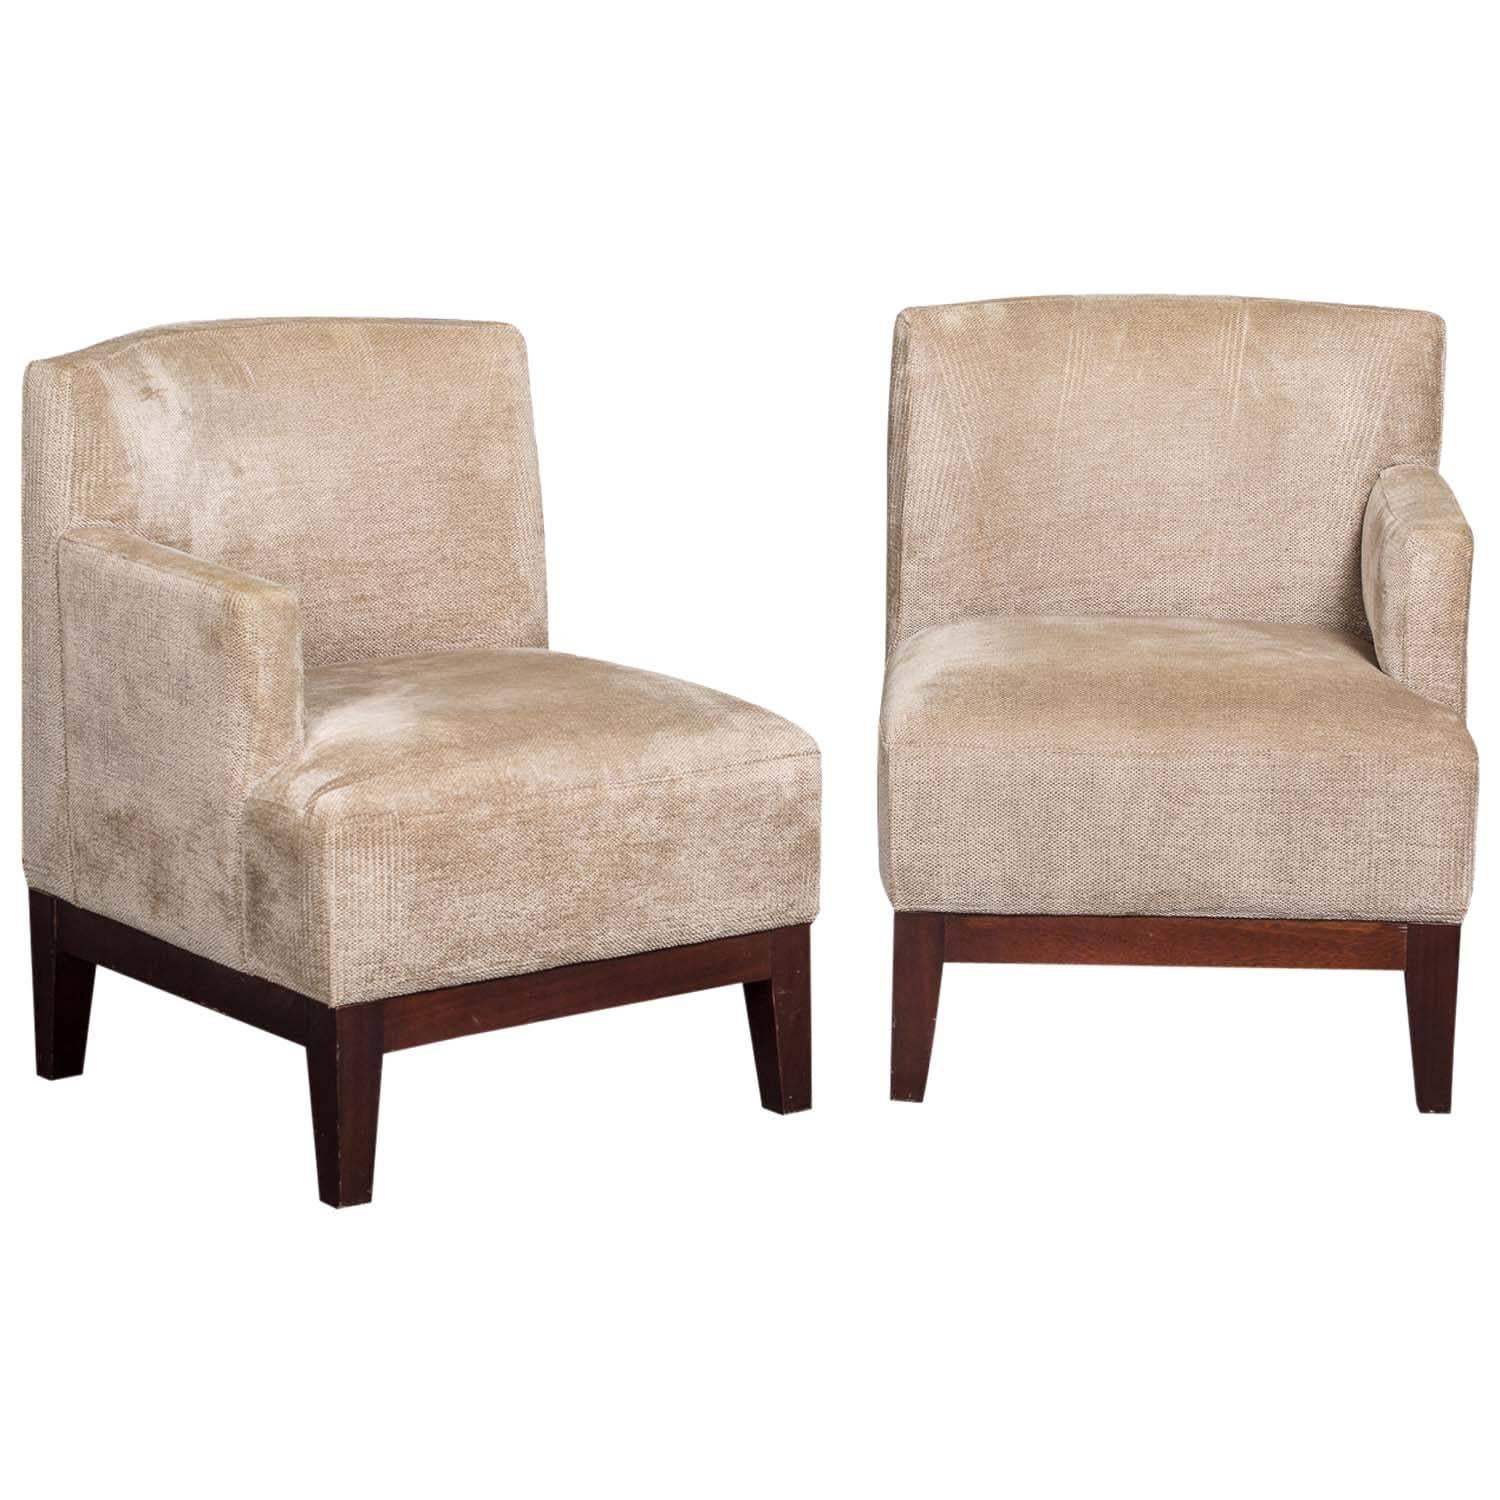 Pair of Spanish Chairs For Sale